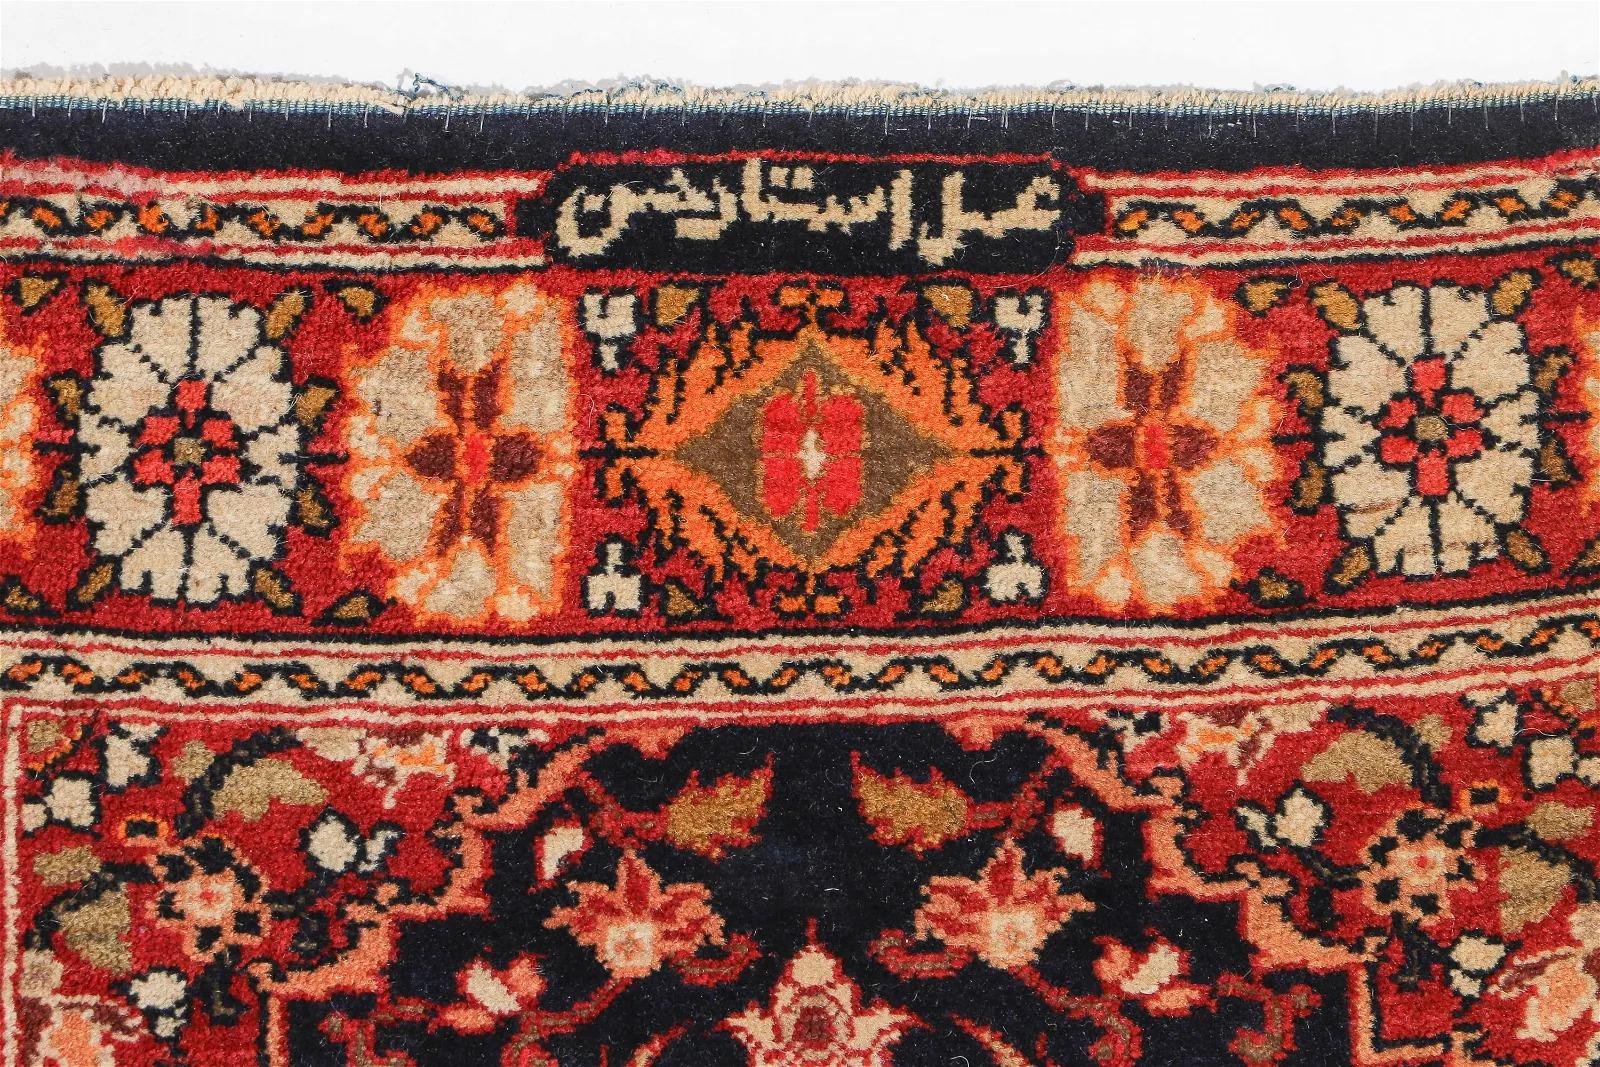 Early 20th Century Lot of 2 Antique Persian Sarouk and Yazd Rugs 2' x 2.5', 1900s - 2B32 For Sale